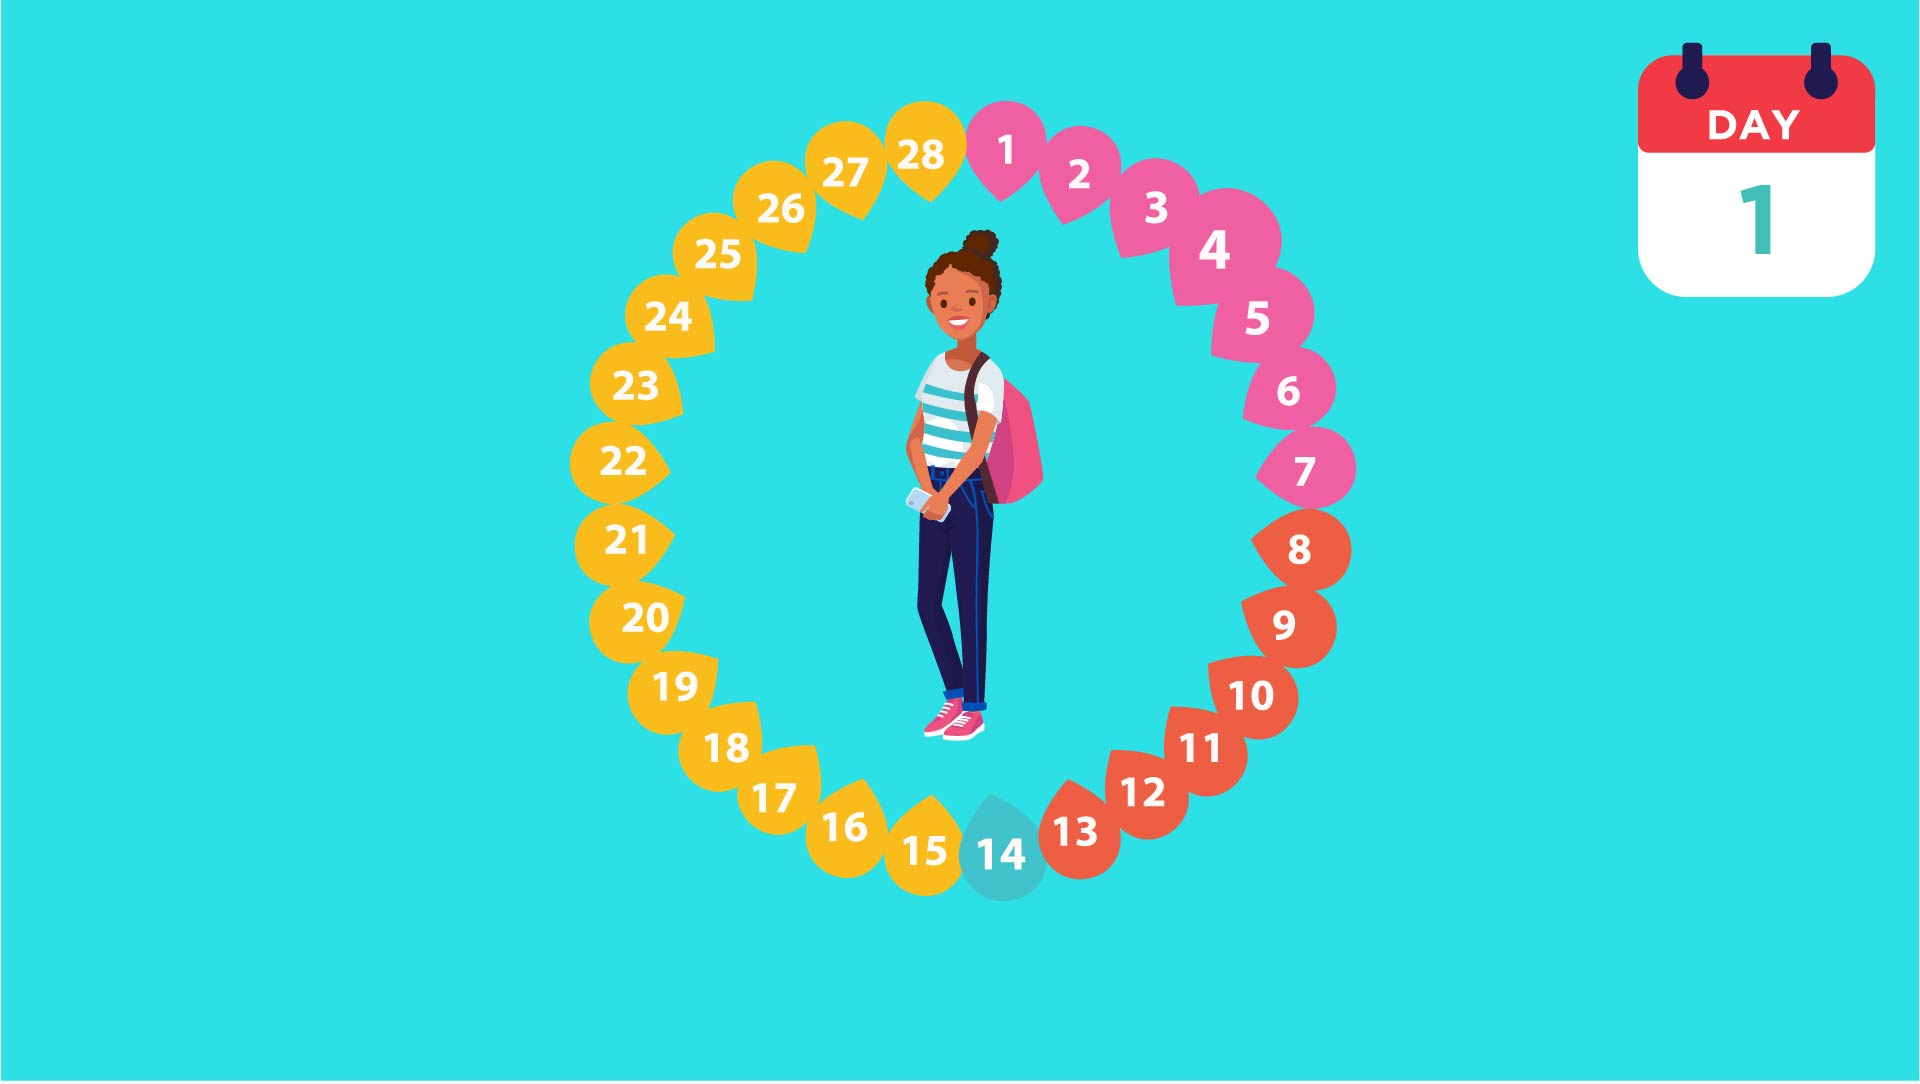 Watch <a tabindex="0" target="_blank" href="https://www.youtube.com/watch?v=nzVKrDDarjs&amp;t=68s" rel="noreferrer" aria-label="noopener noreferrer">Your Menstrual Cycle &amp; Periods - what you need to know in less than 3 minutes</a>